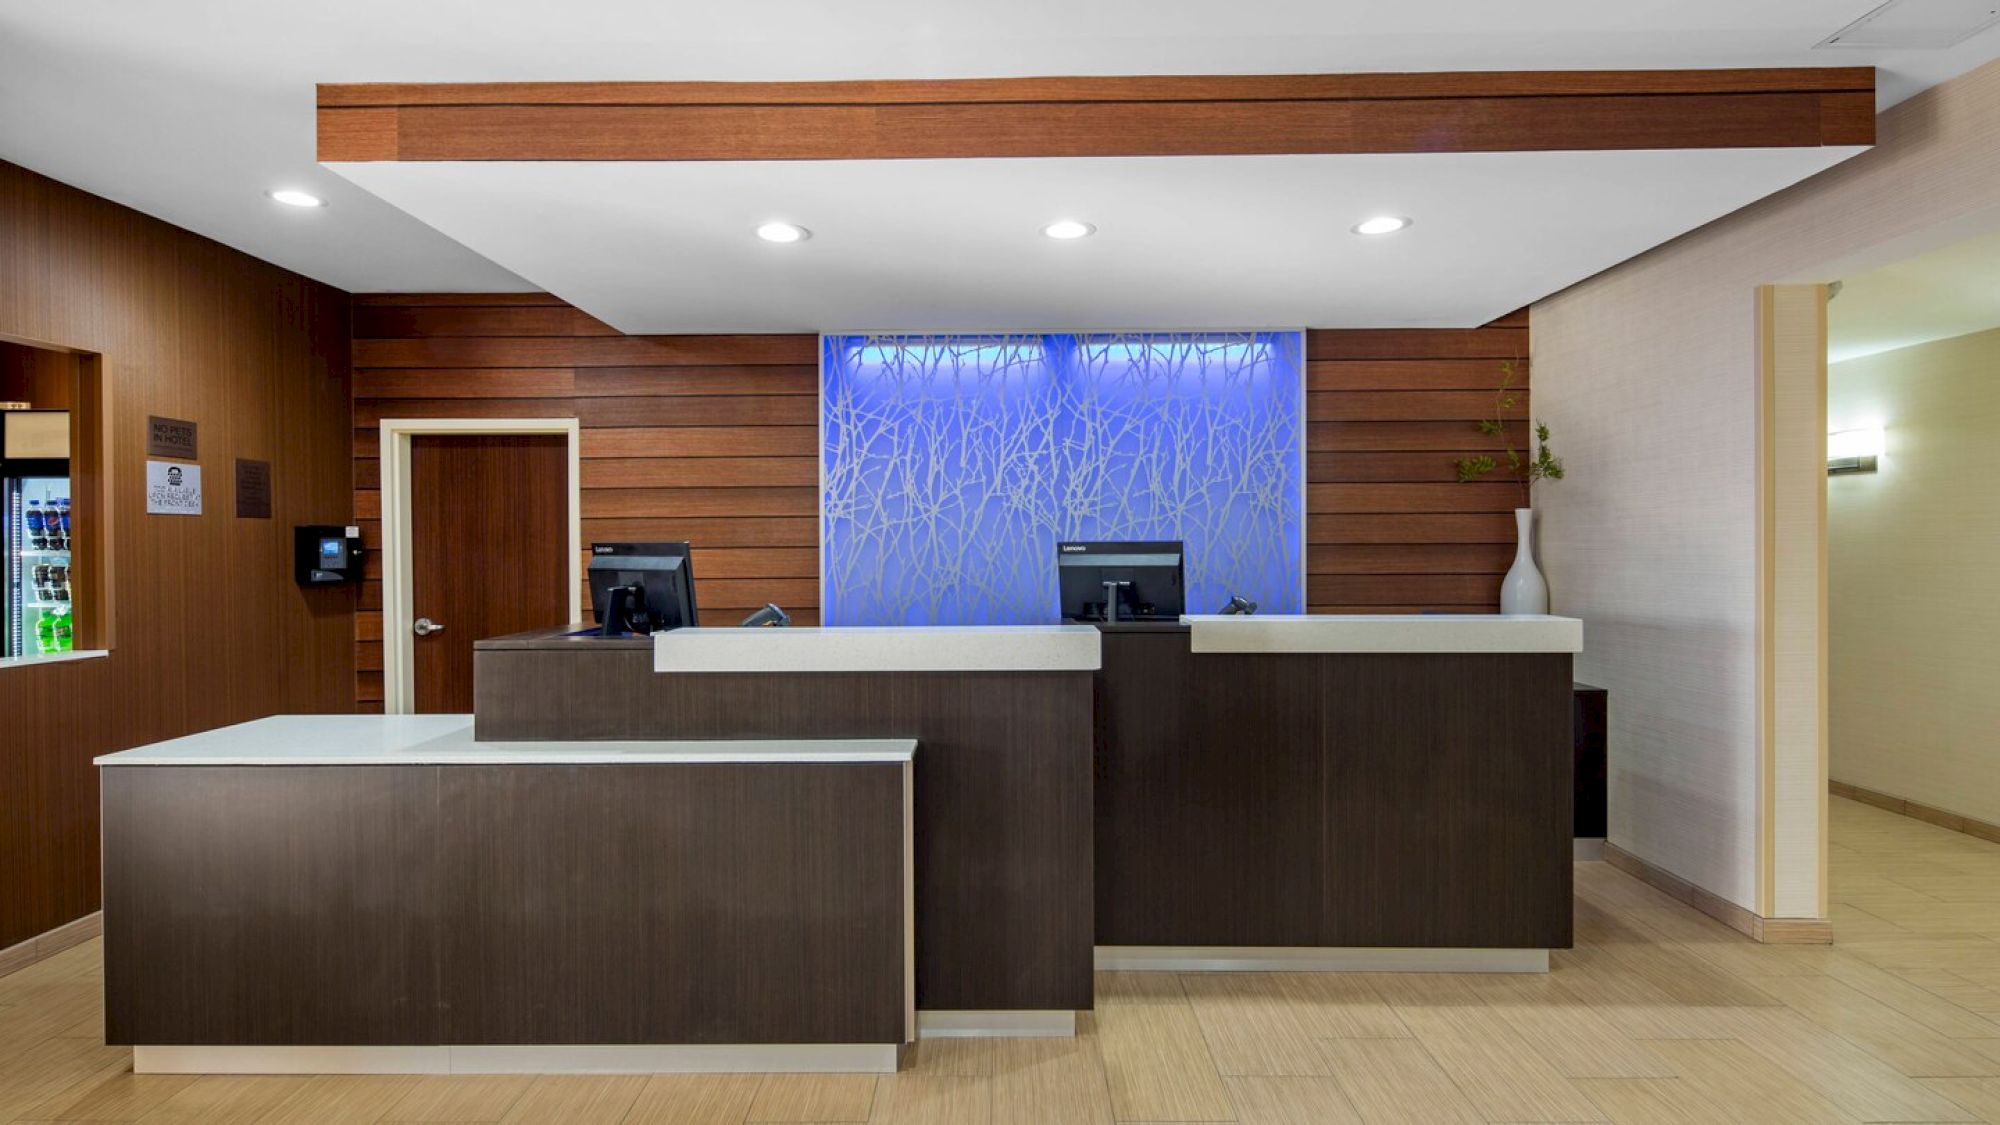 This image shows a modern hotel reception area with two desks, computers, a vase, and backlit blue artwork on the wall behind.